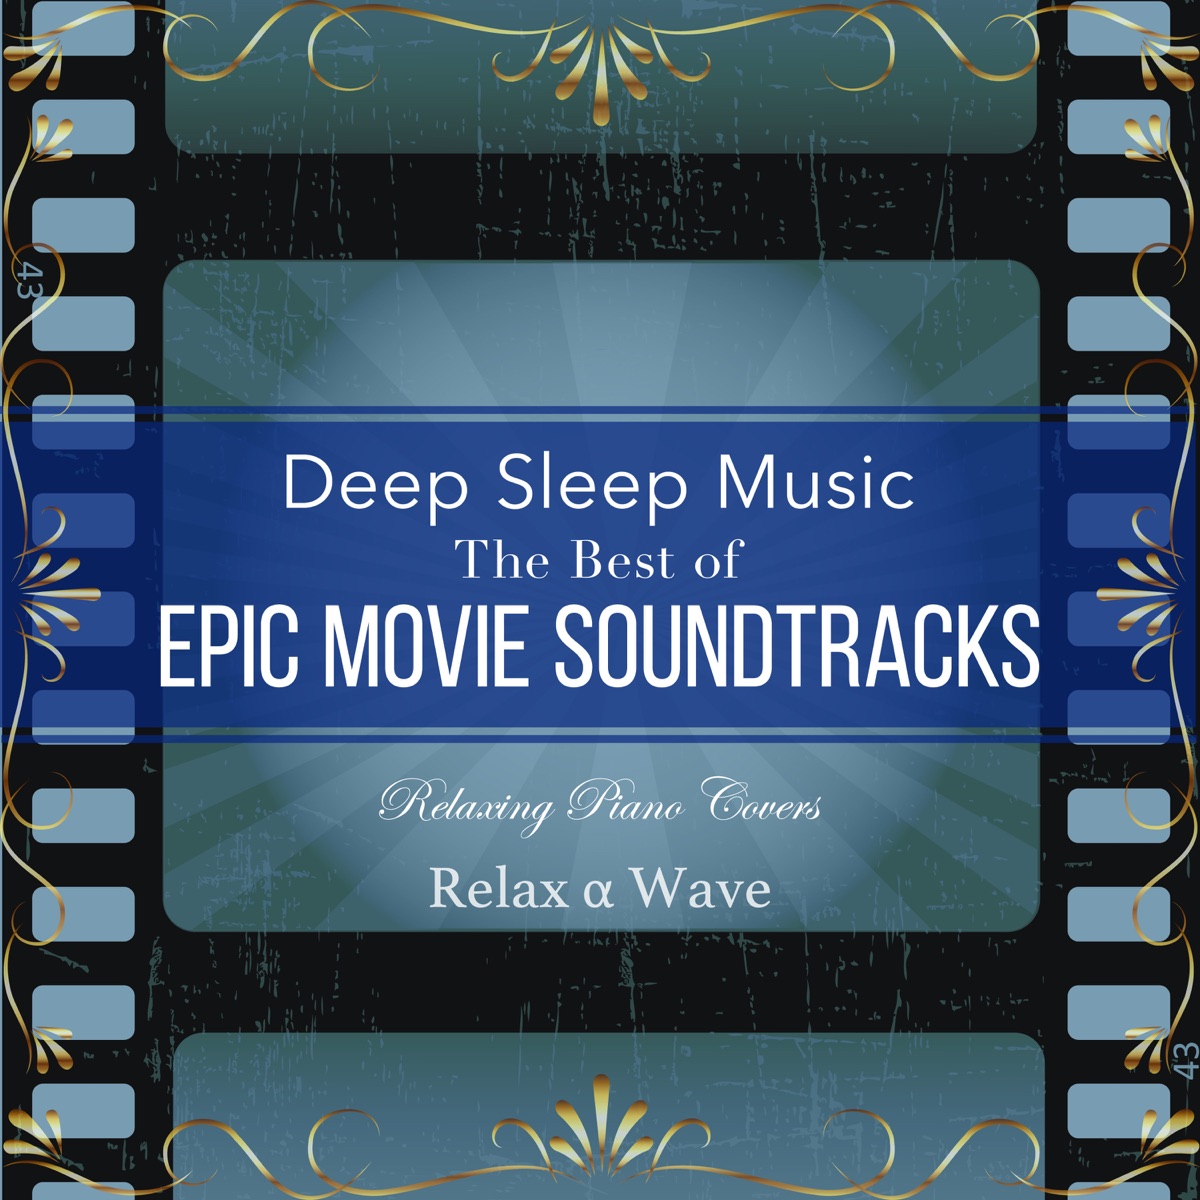 Deep Sleep Music - the Best of Epic Movie Soundtracks: Relaxing Piano  Covers - Album by Relax α Wave - Apple Music